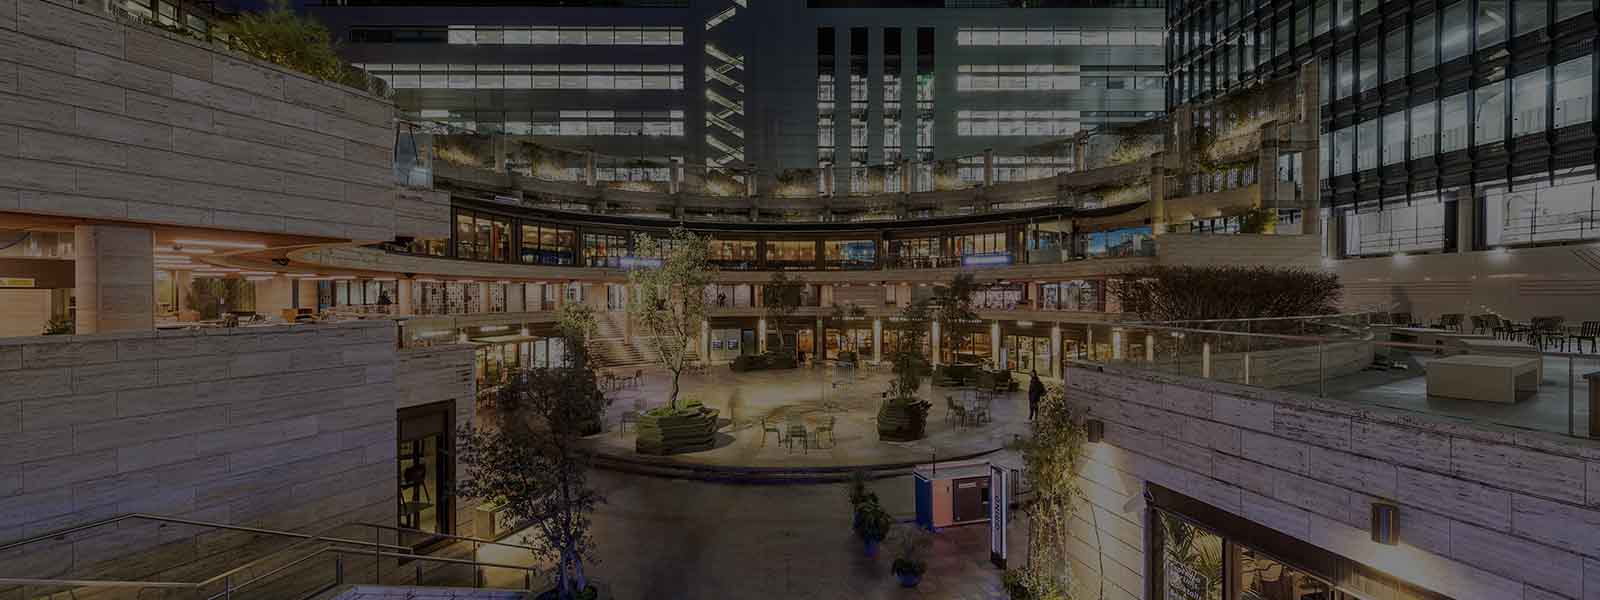 A picture of the Broadgate Circle redevelopment in London at night time, including landscaping, with ambient purple, white and yellow lighting. 